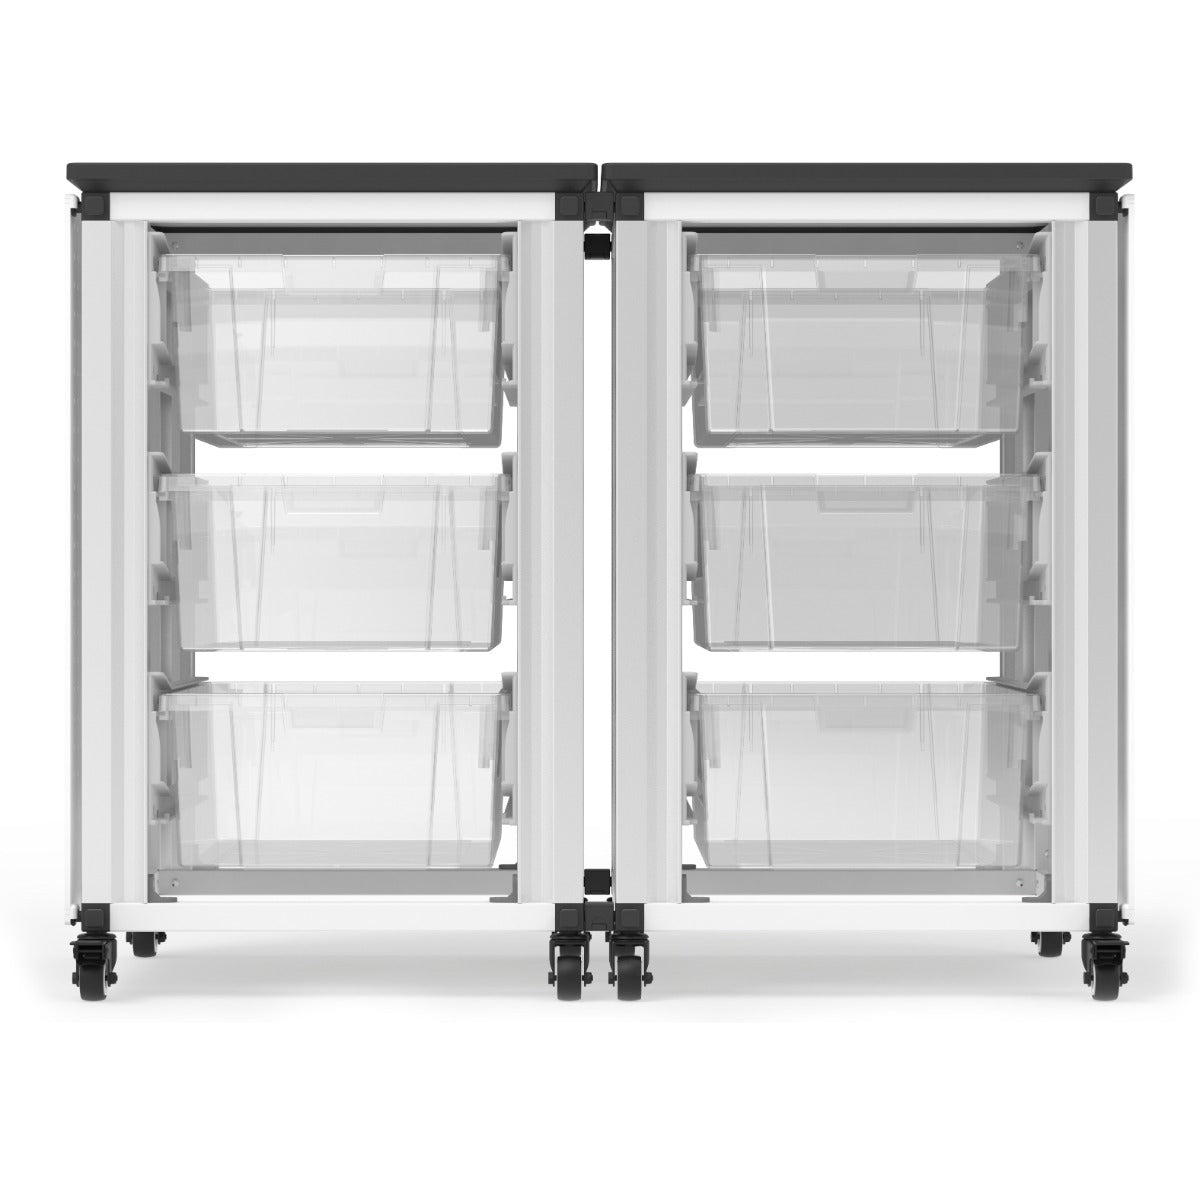 Luxor Modular Classroom Storage Cabinet - 2 side-by-side modules with 6 large bins (LUX-MBS-STR-21-6L) - SchoolOutlet